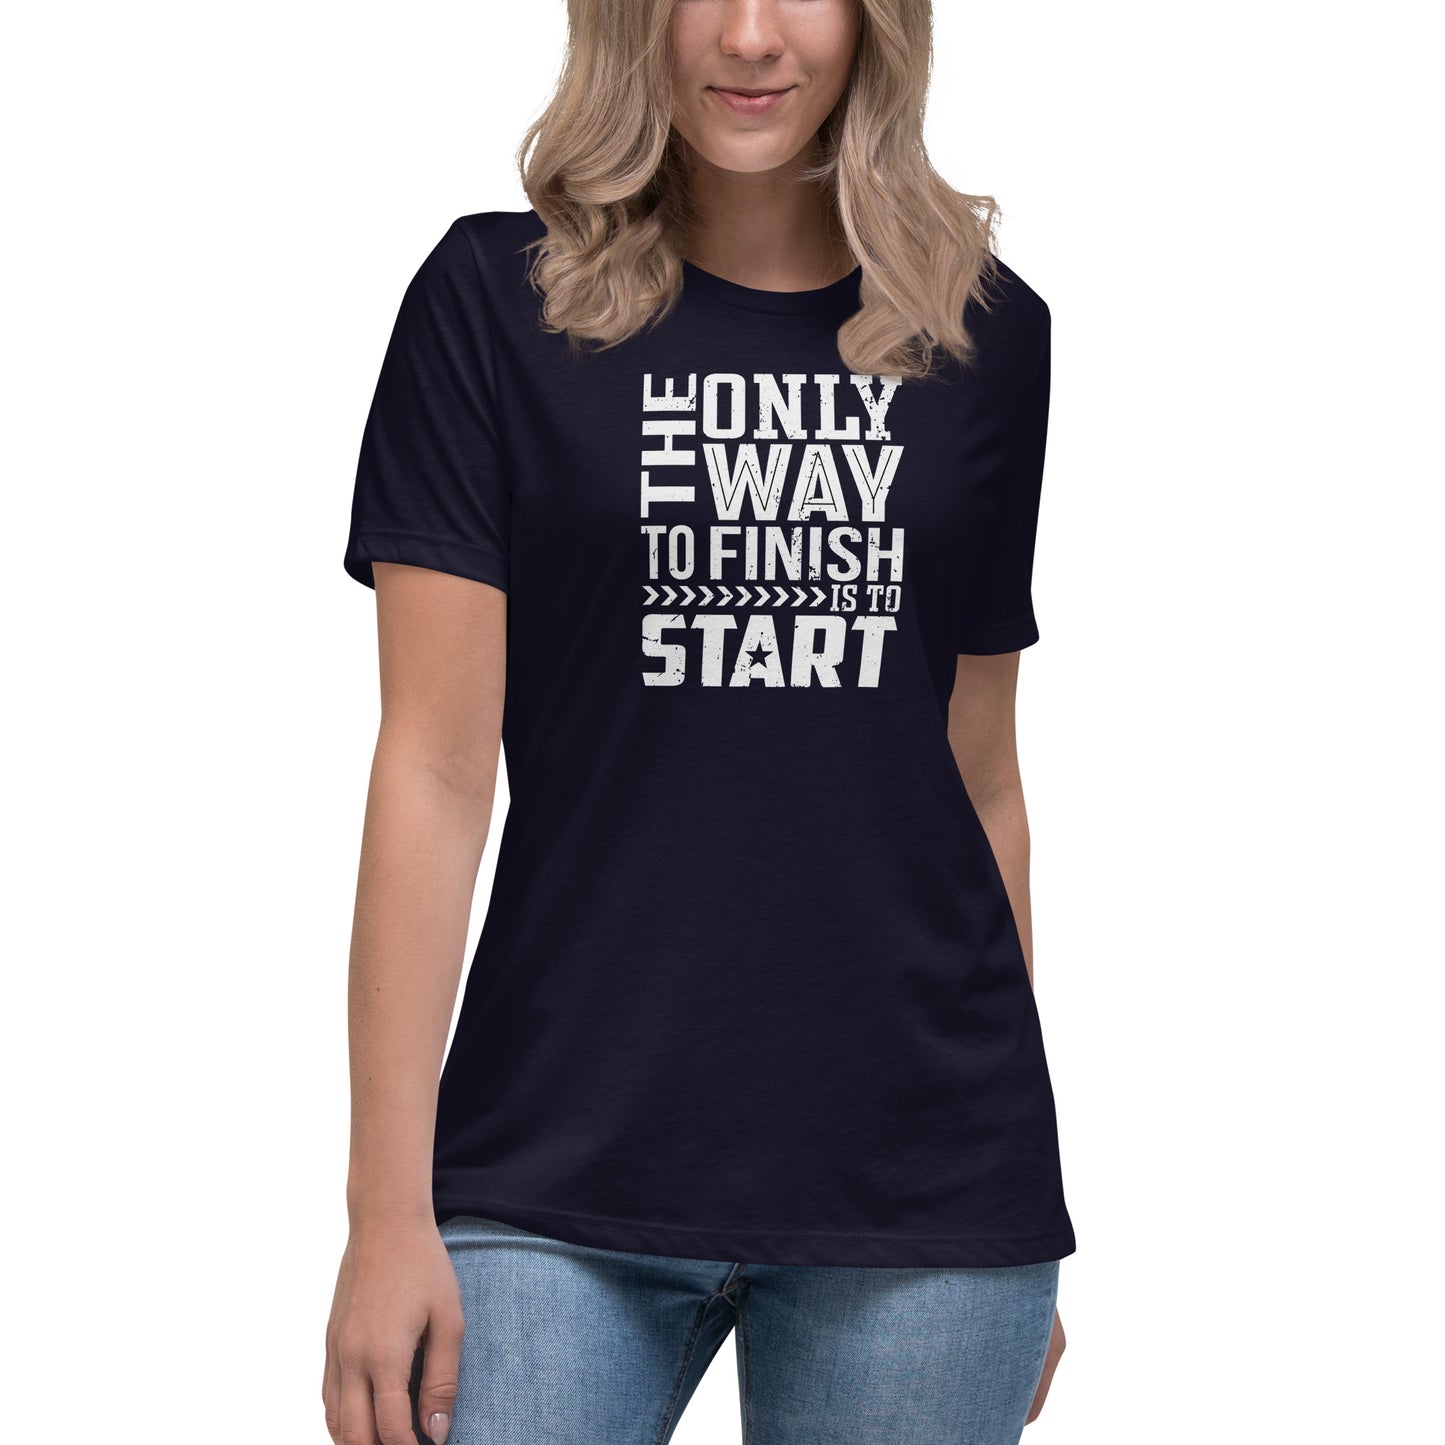 Women's Relaxed T-Shirt the only way to finish is to start